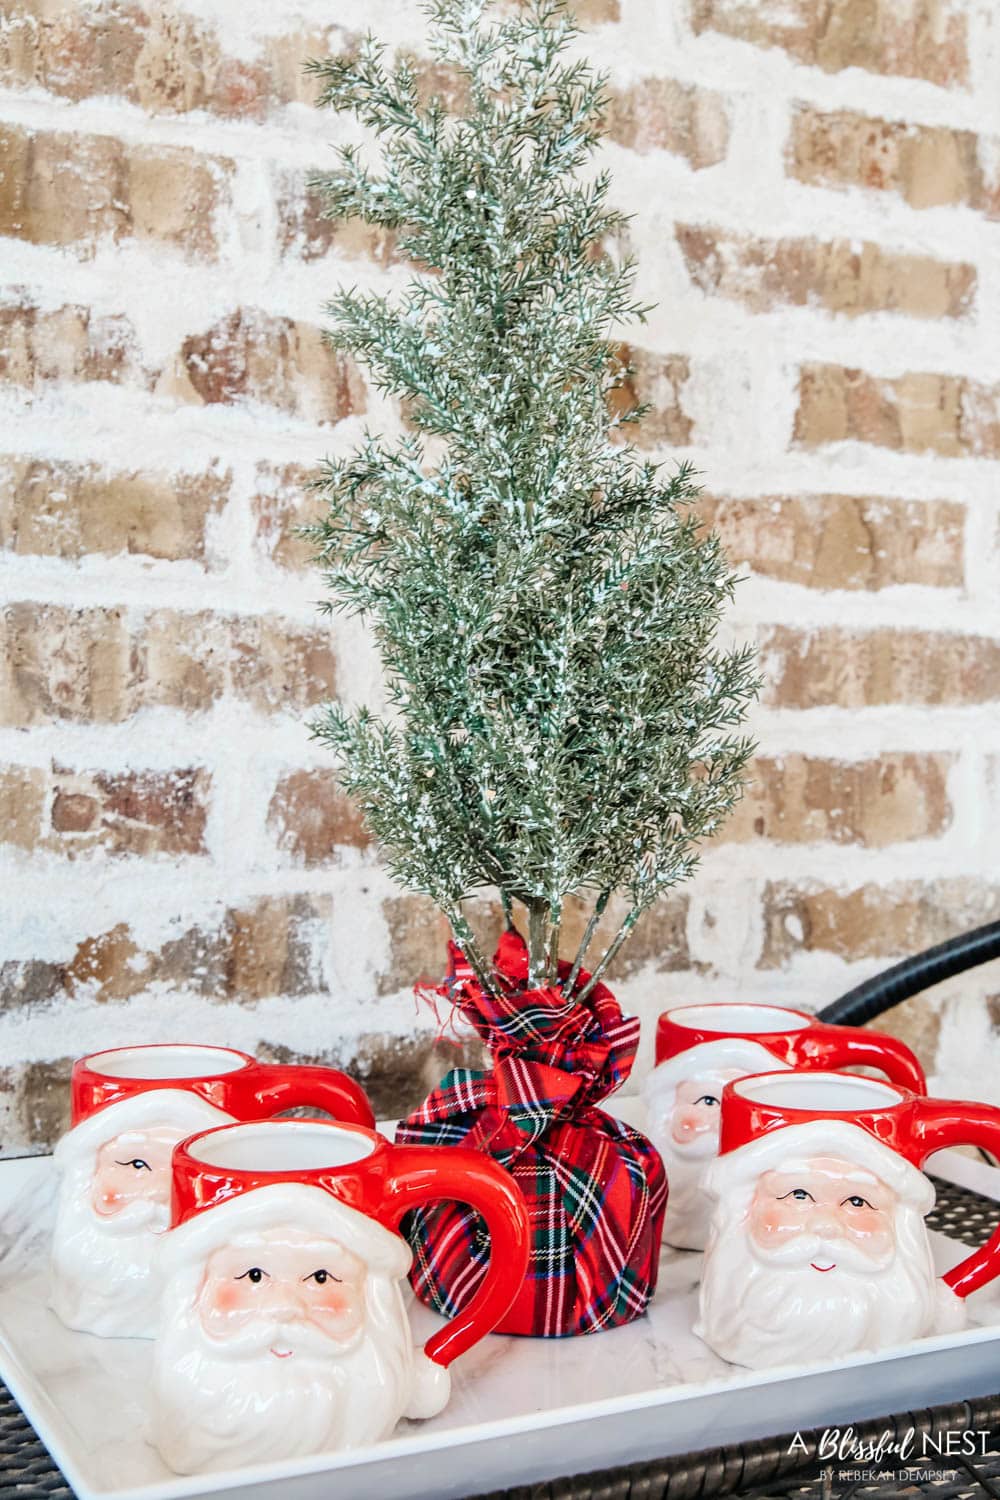 Easy and affordable holiday home decor ideas for any space. #ABlissfulNest #christmasdecor #christmas